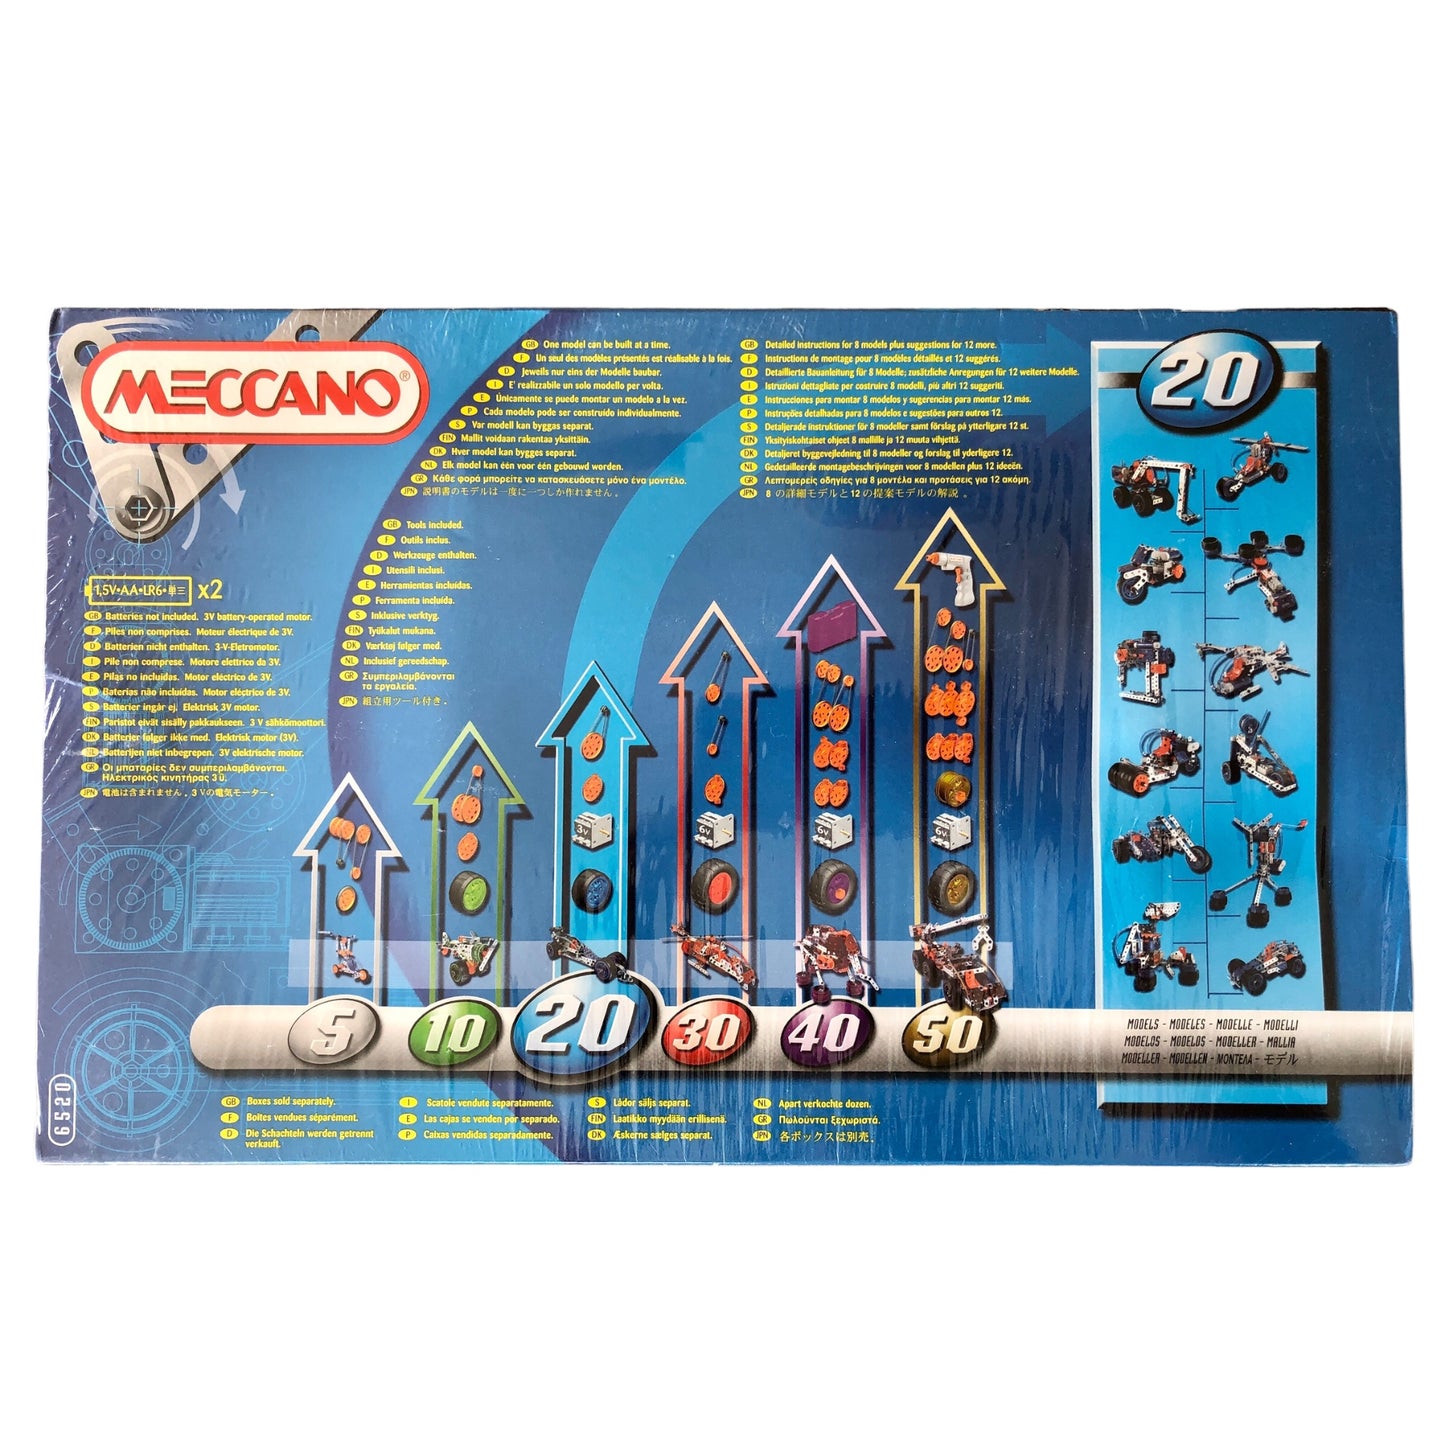 Meccano Motion System 5510 - 261 pieces - 20 models